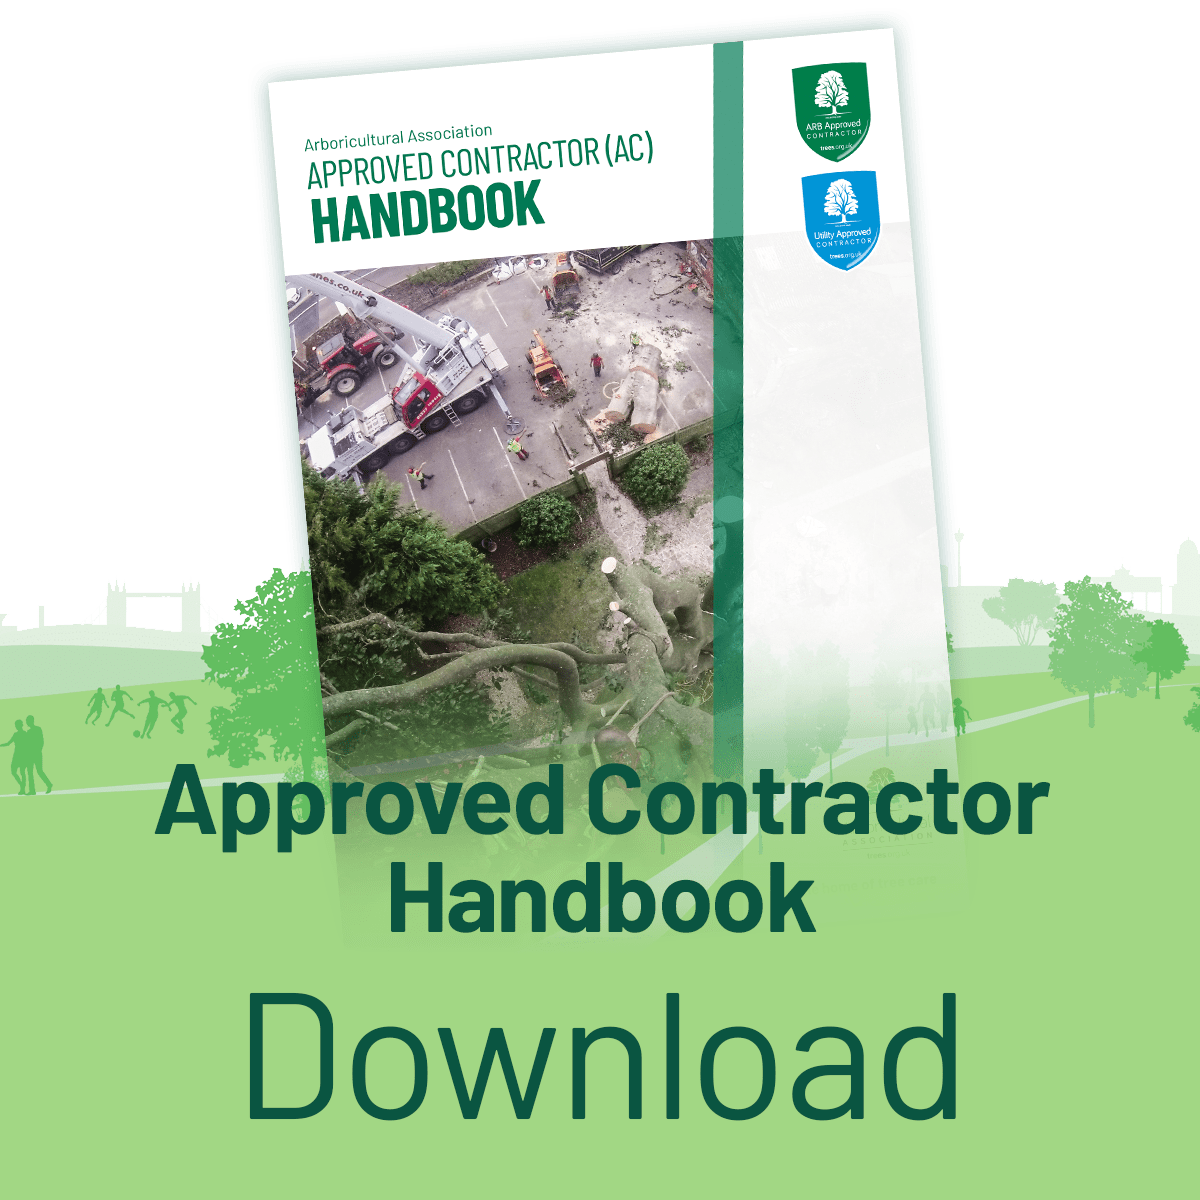 Click here to download the handbook